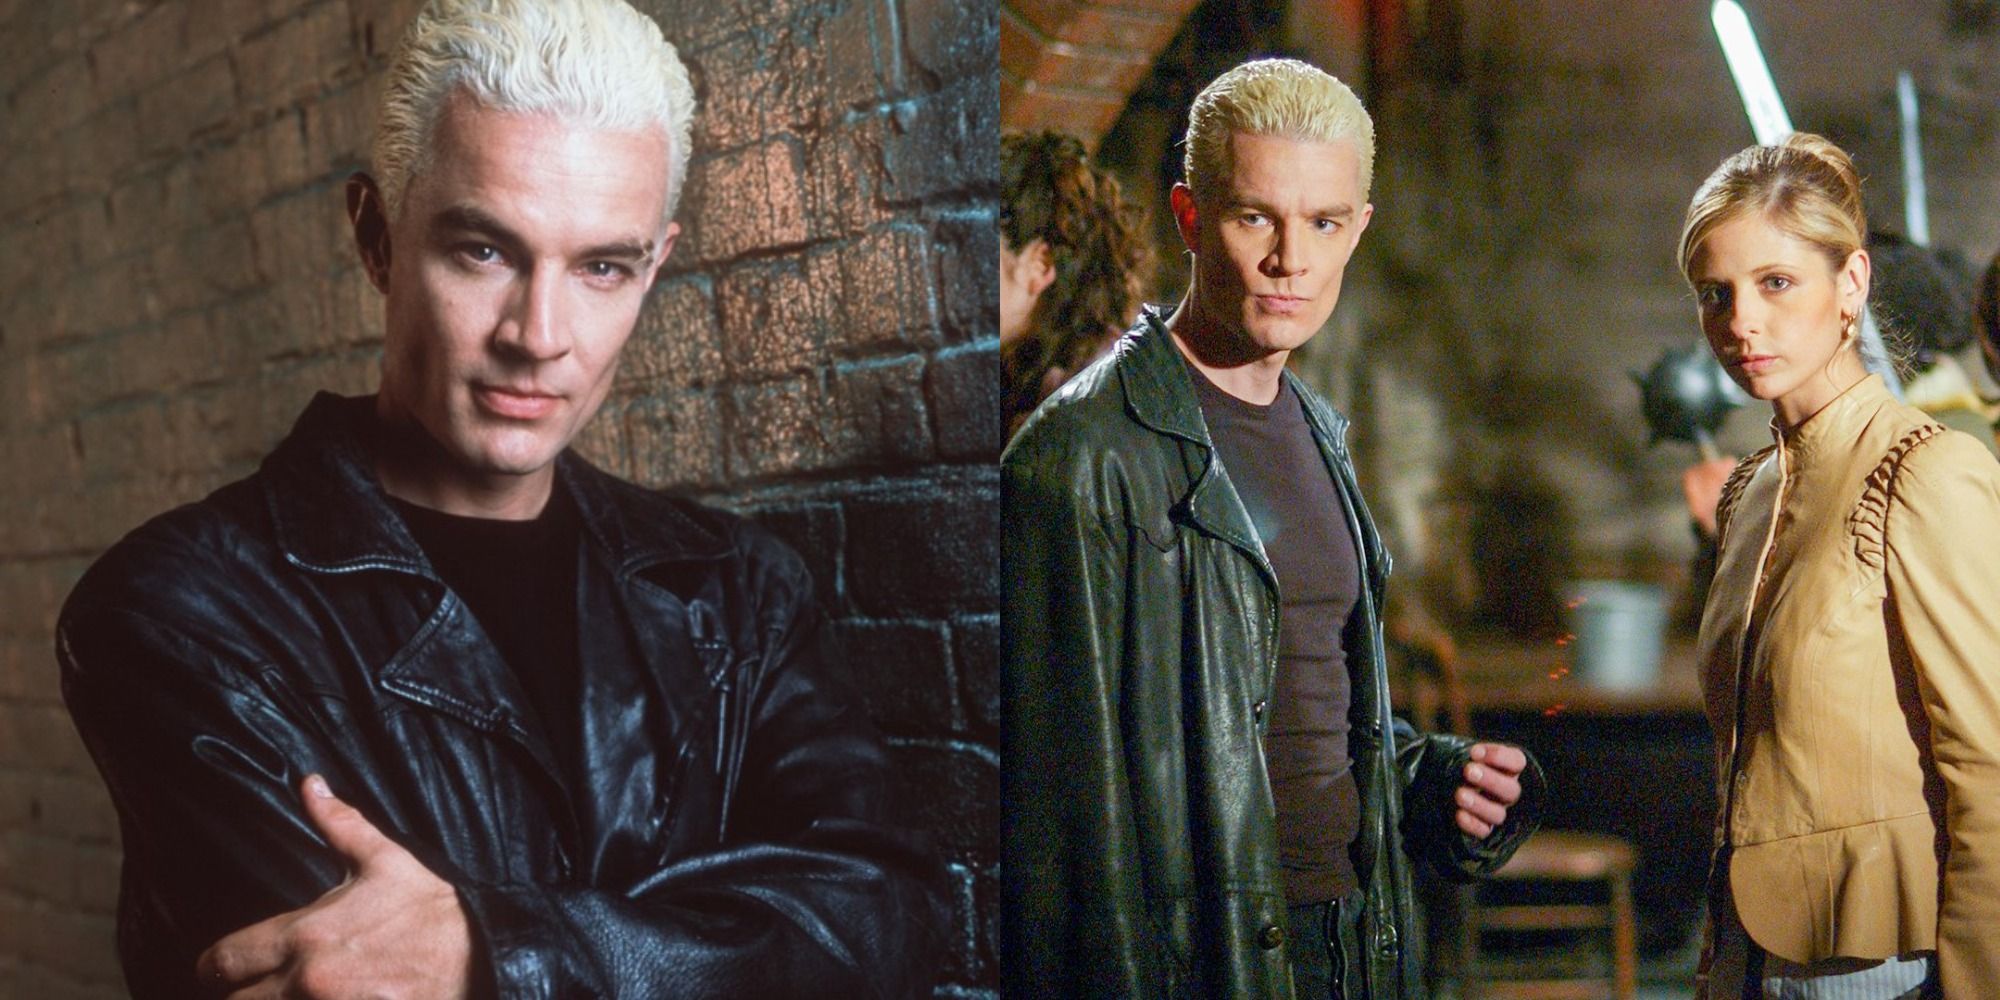 Split image showing Spike alone and with Buffy in Buffy the Vampire Slayer